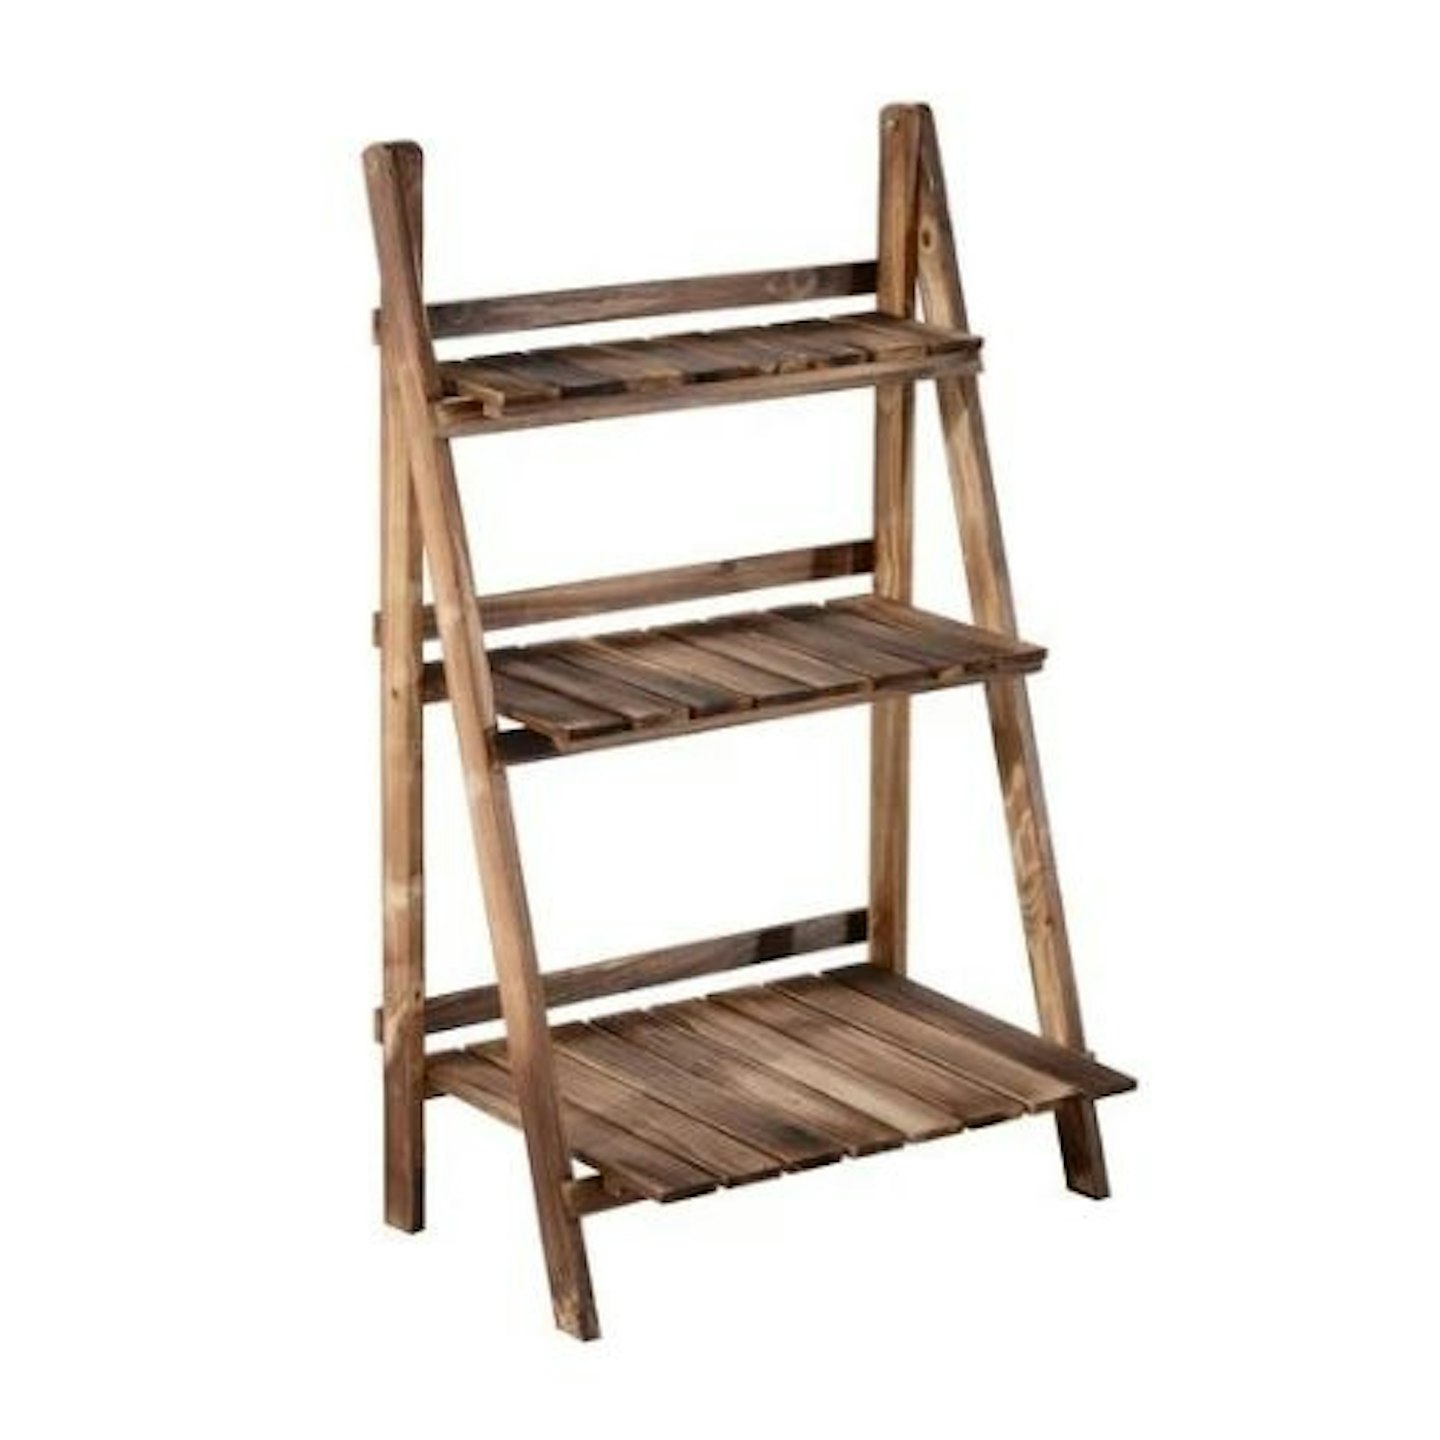 Outsunny Wooden Folding Flower Stand 3 Tier Planter Display Ladder